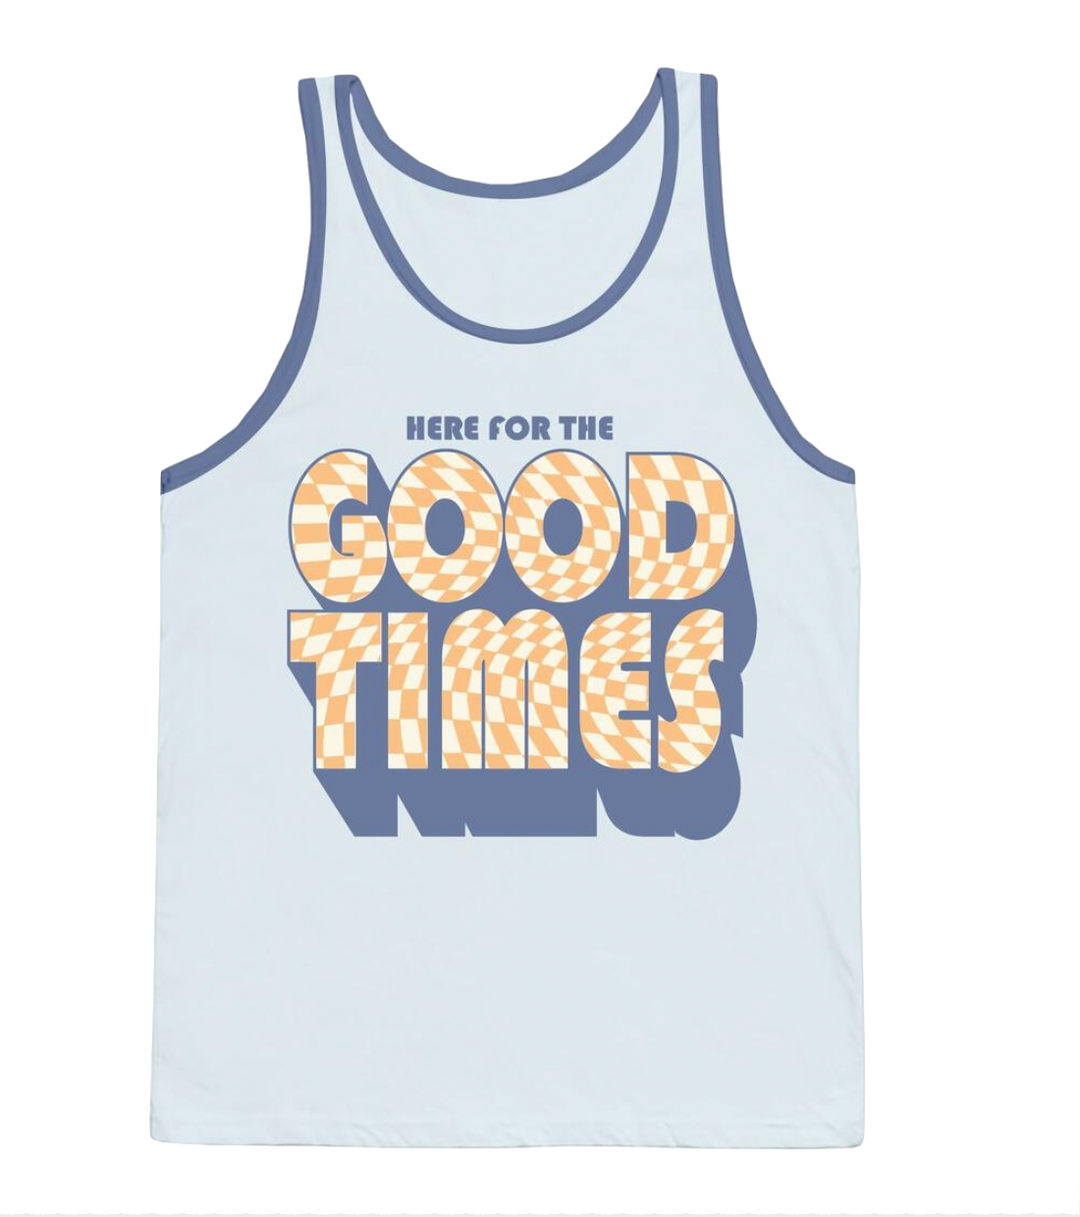 Tiny Whales - Here For the Good Times Tank in Sky Blue